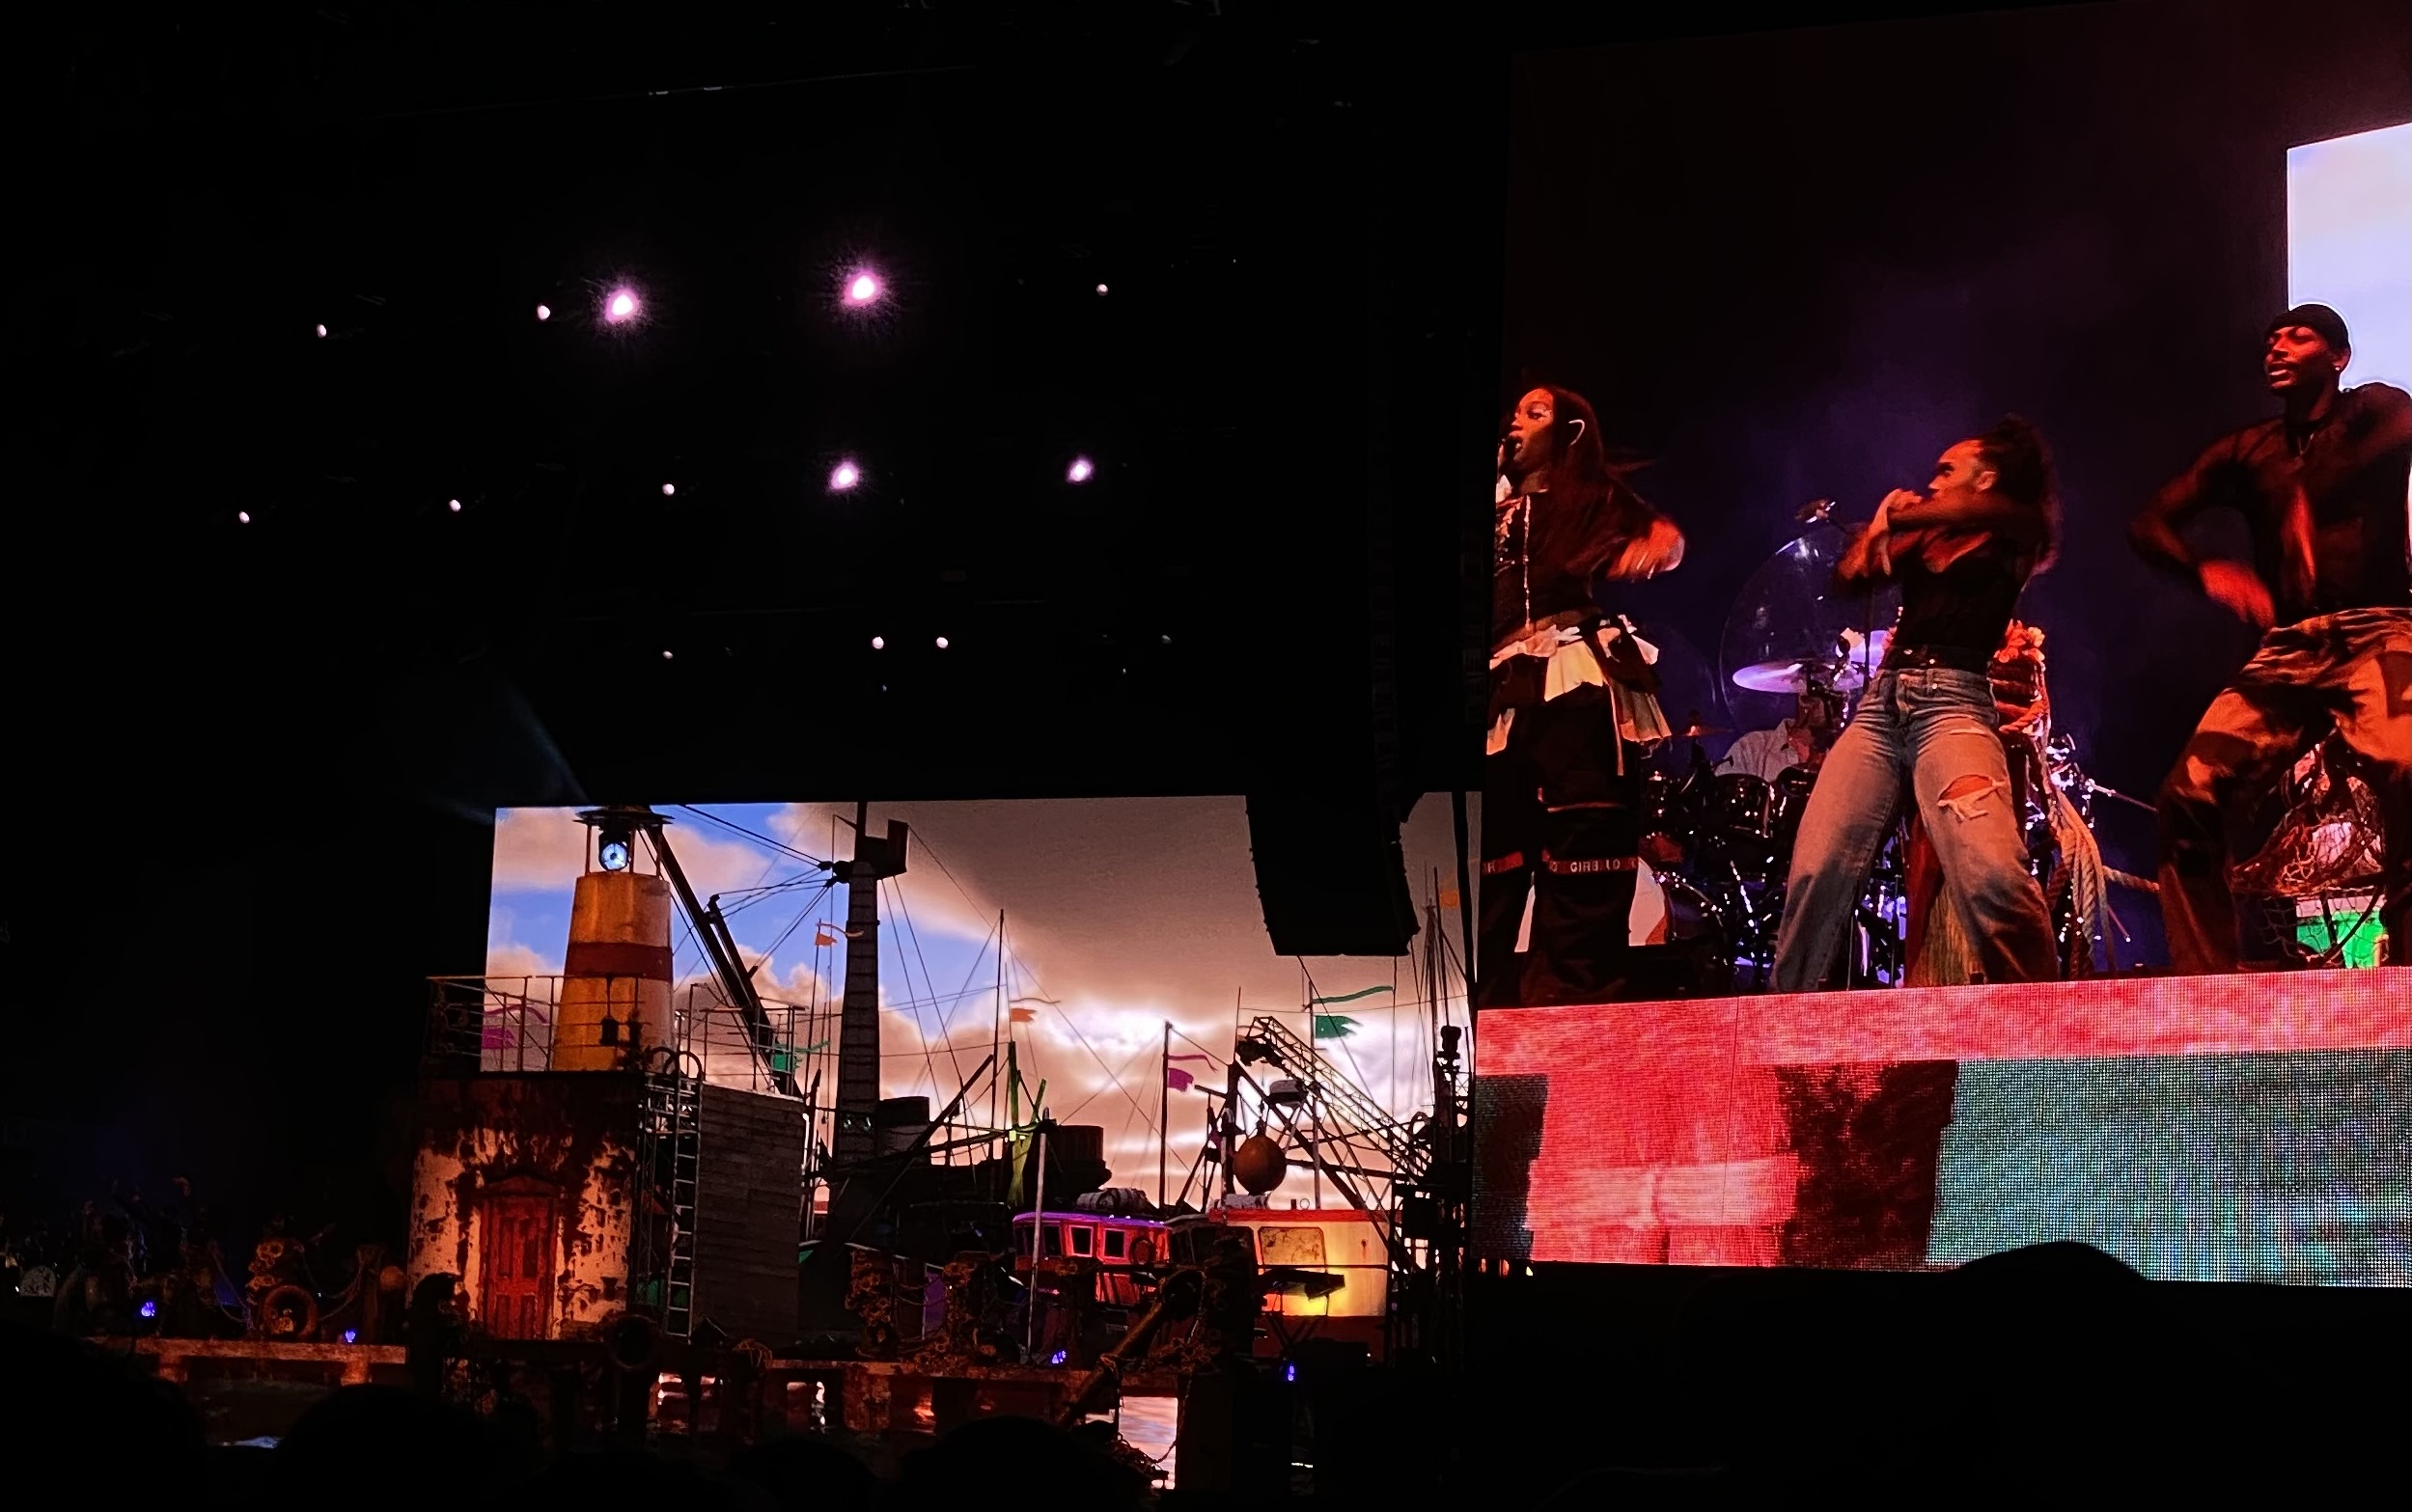 : Image features a close-up view of SZA and two dancers projected on side-stage viewing screen to the right of the stage. An intricate and nautical stage design is seen to the left of the viewing screen, ultimately enhanced by moody, dramatic lighting .